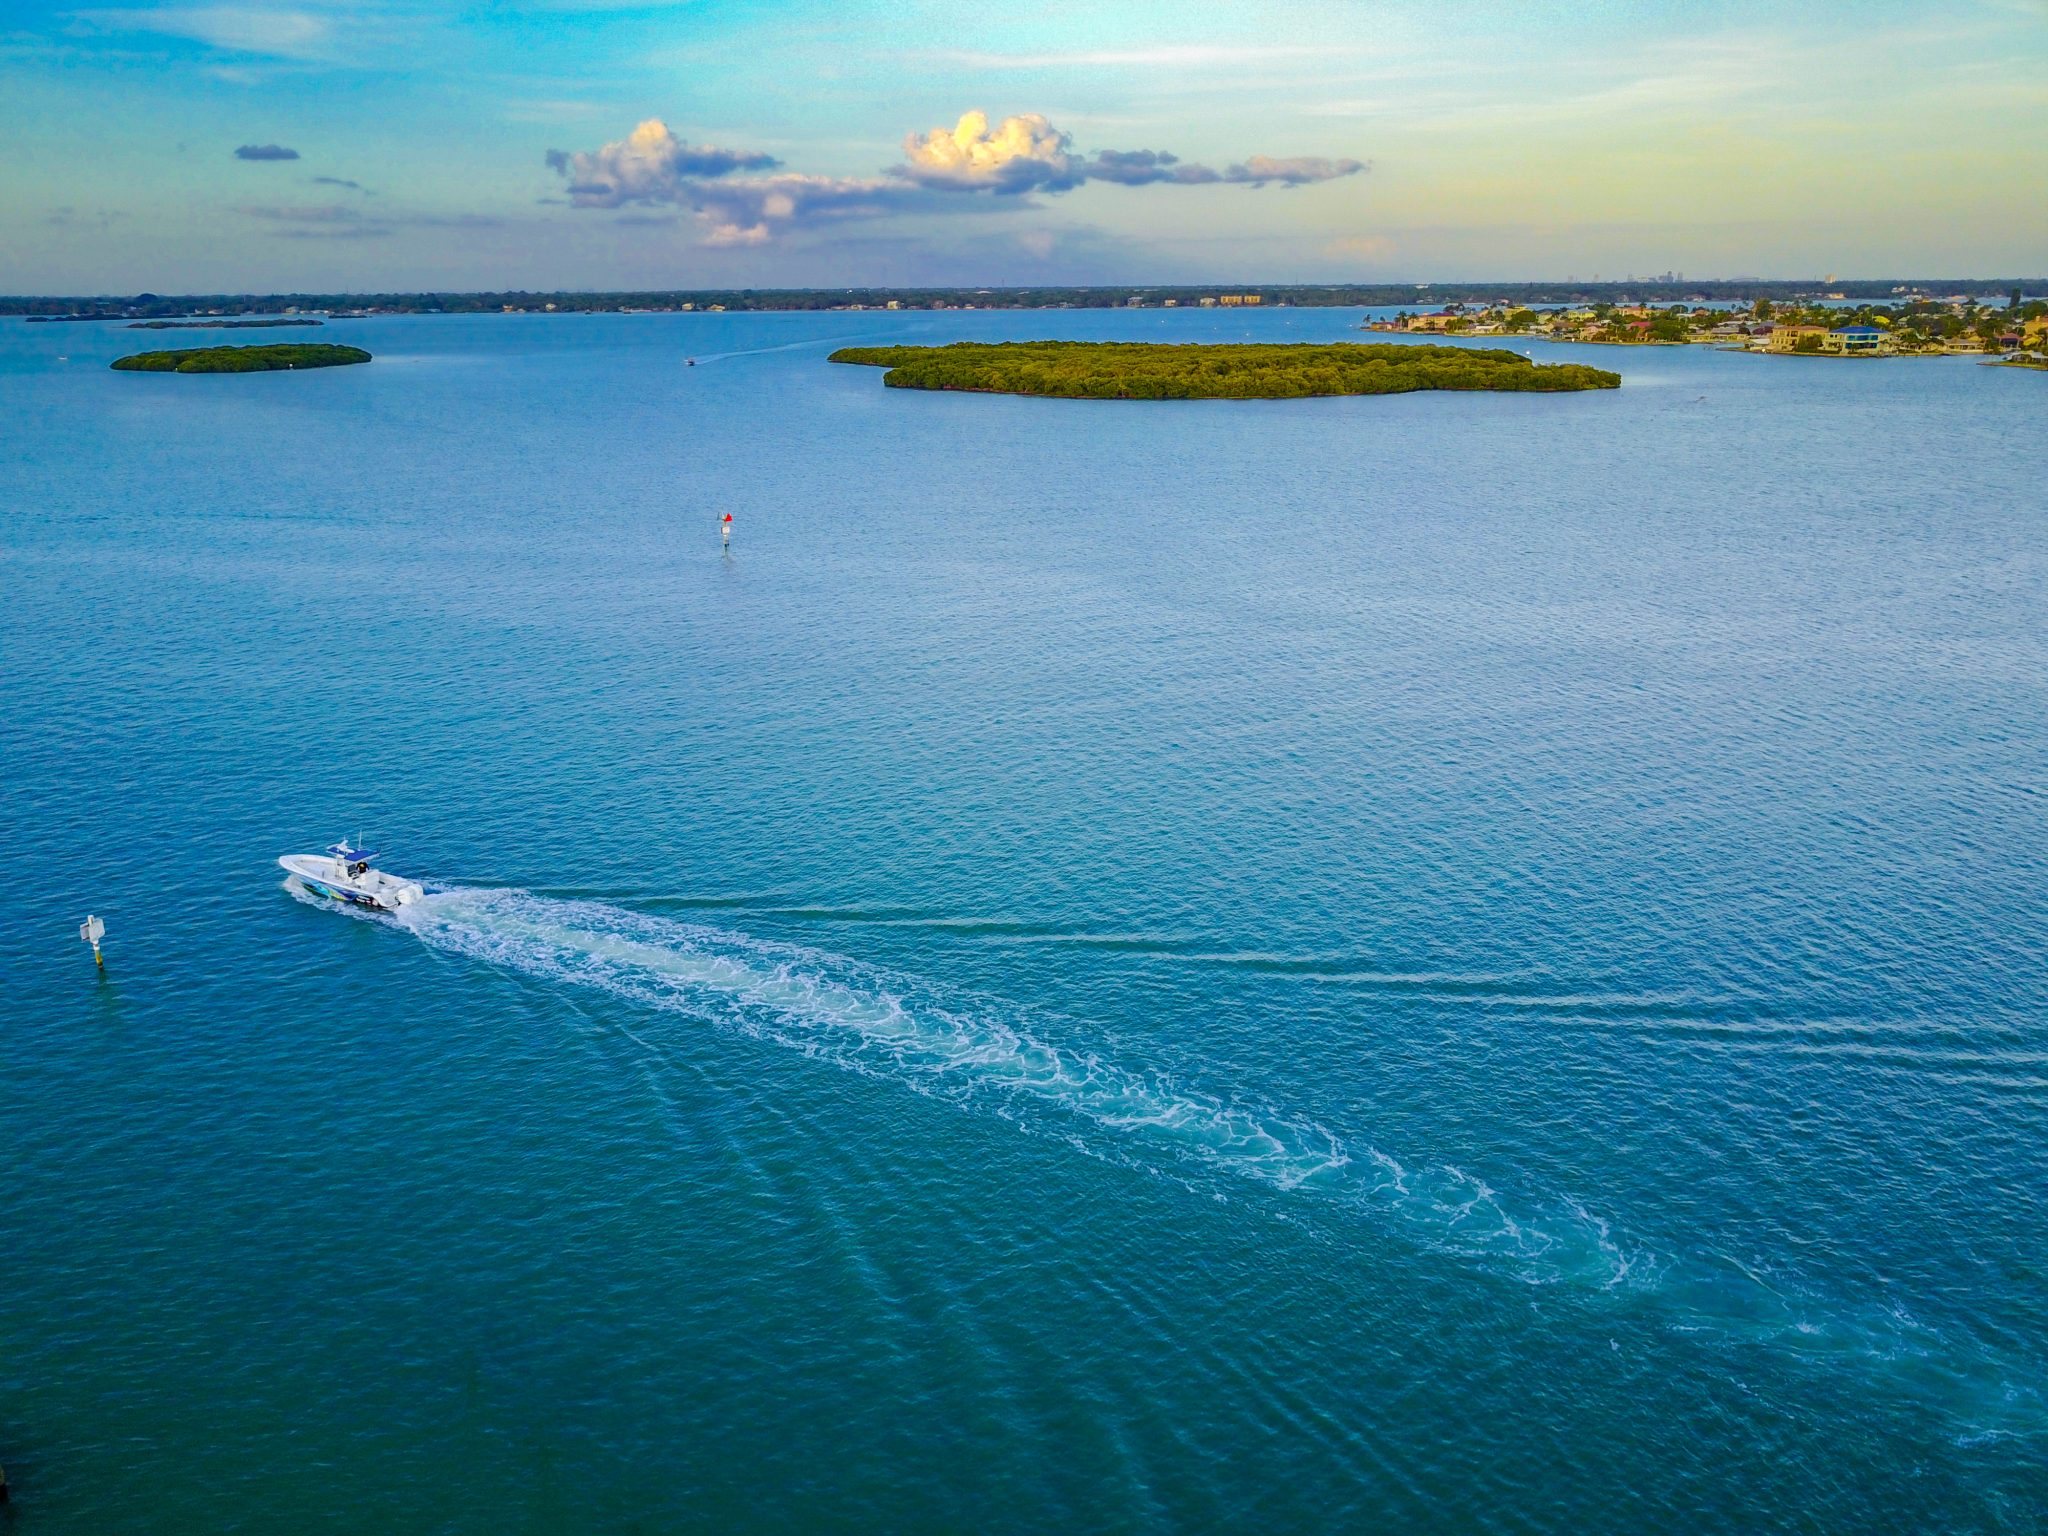 Drone shot over Boca Ciega Bay in Clearwater, Florida